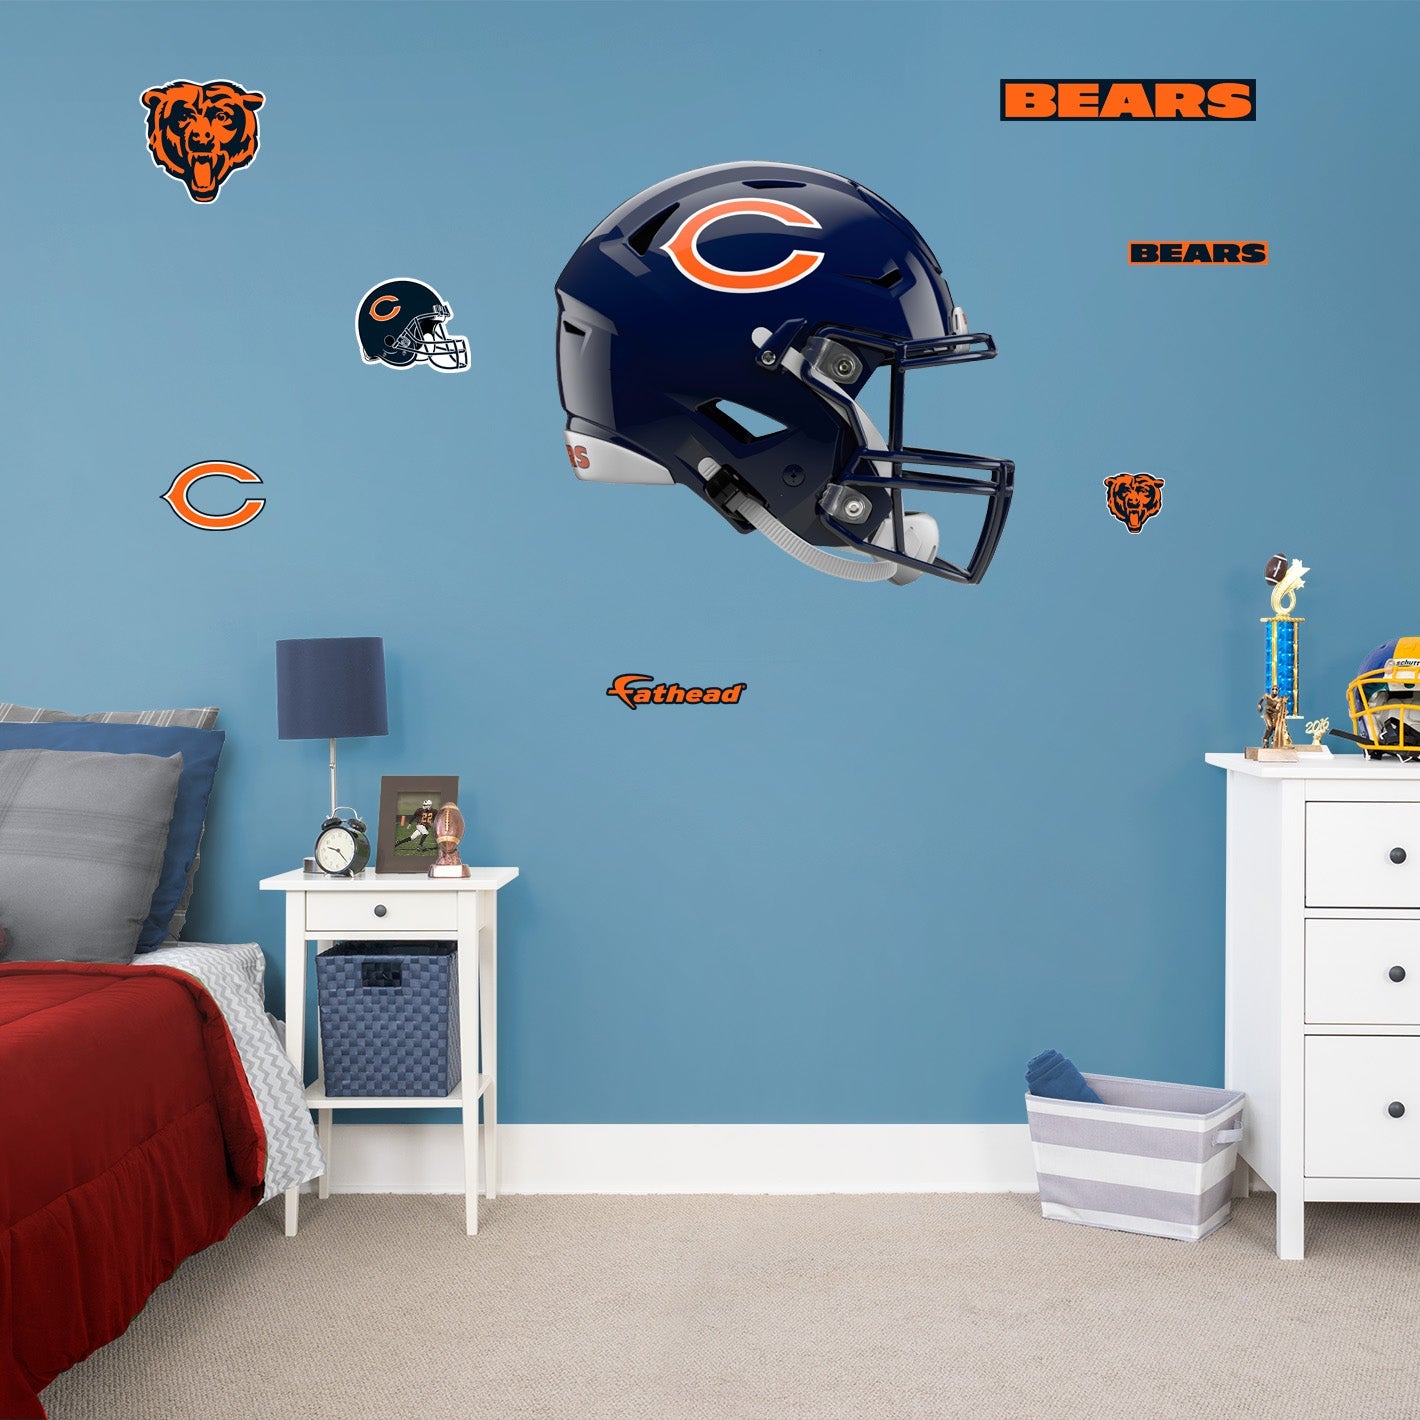 Chicago Bears: Helmet - Officially Licensed NFL Removable Adhesive Decal